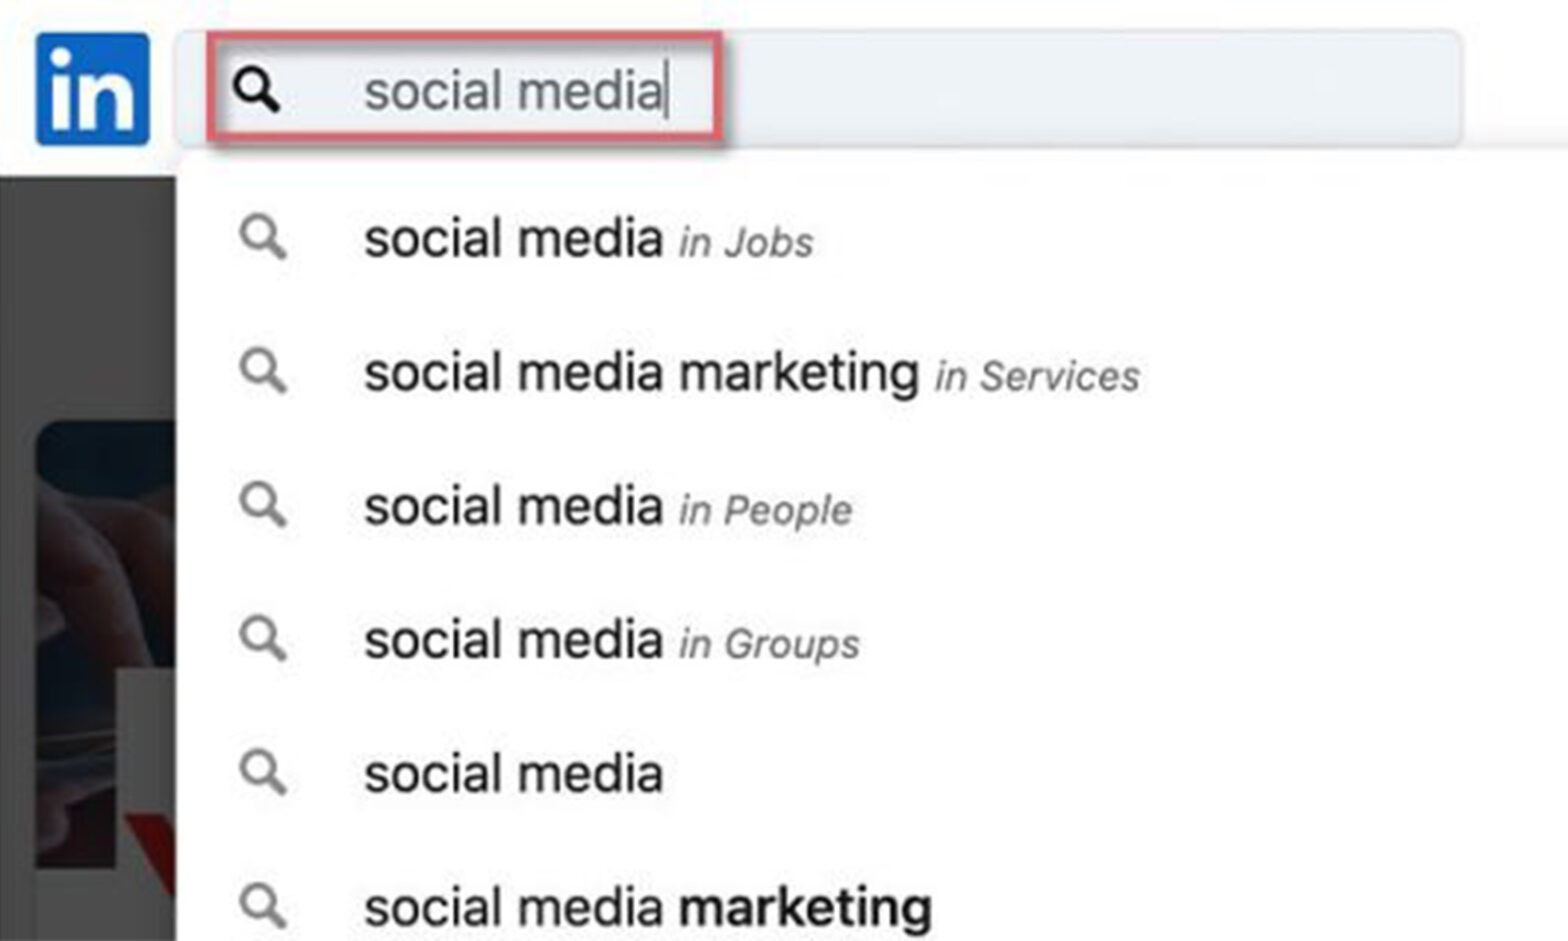 Featured image for post: SEO Guide to Optimizing Your LinkedIn Profile